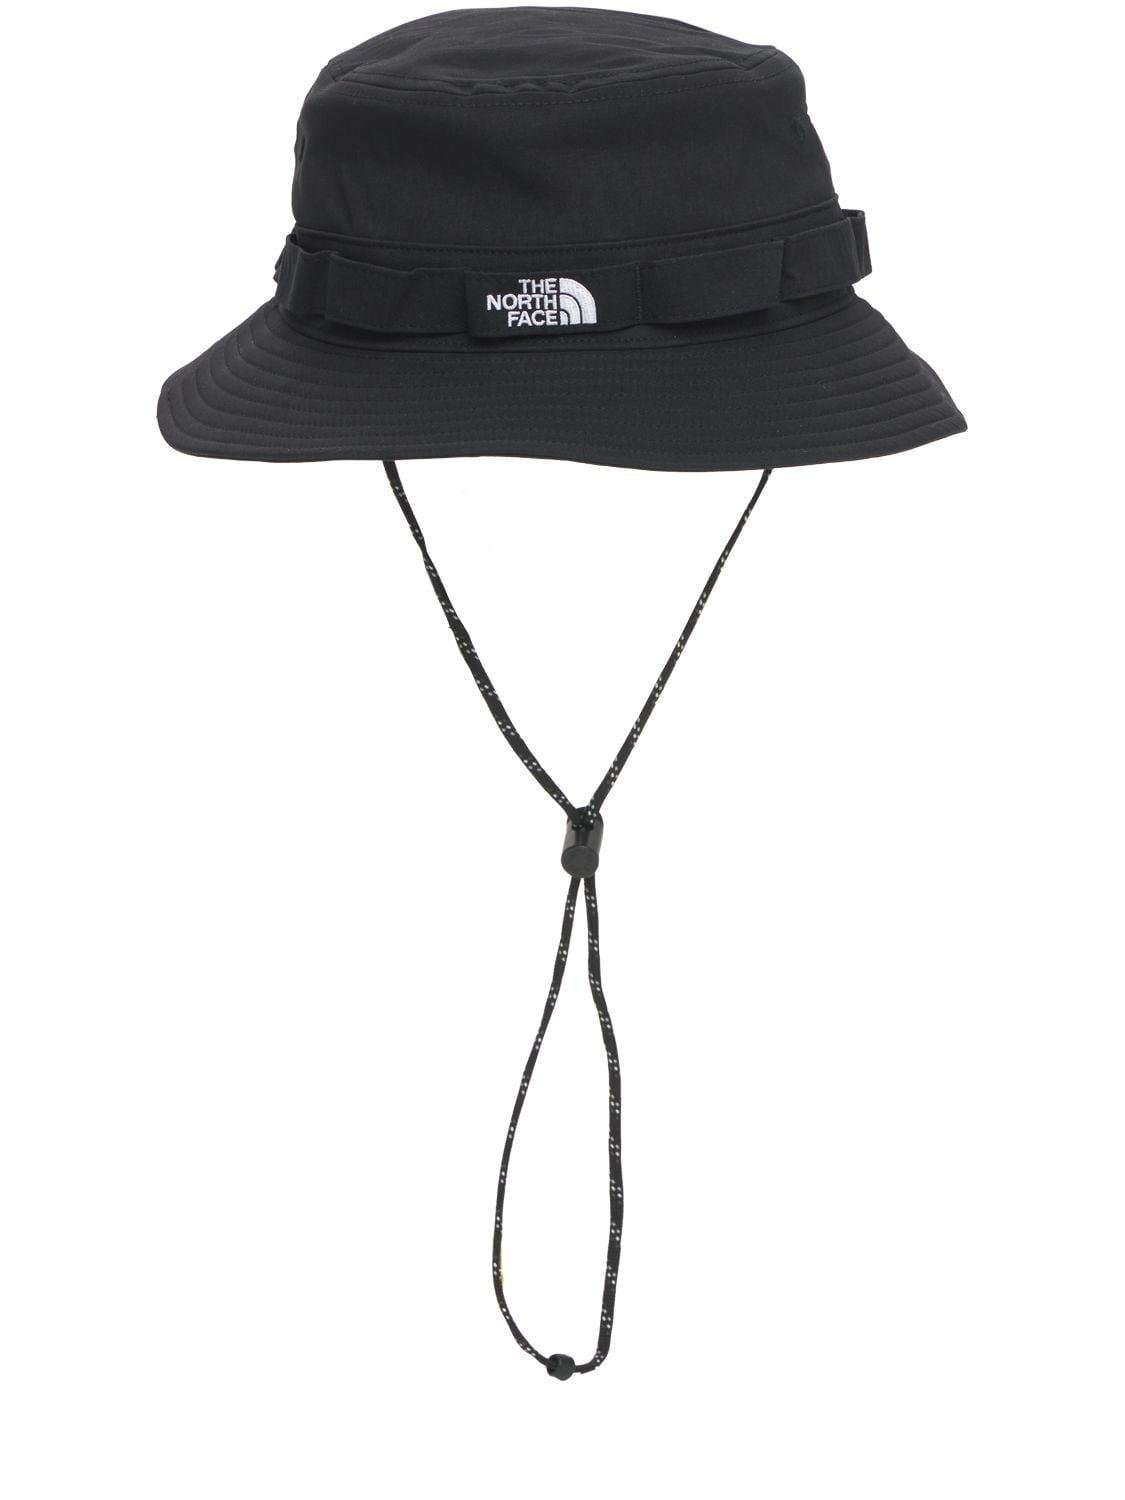 The North Face Brimmer Bucket Hat in Black for Men